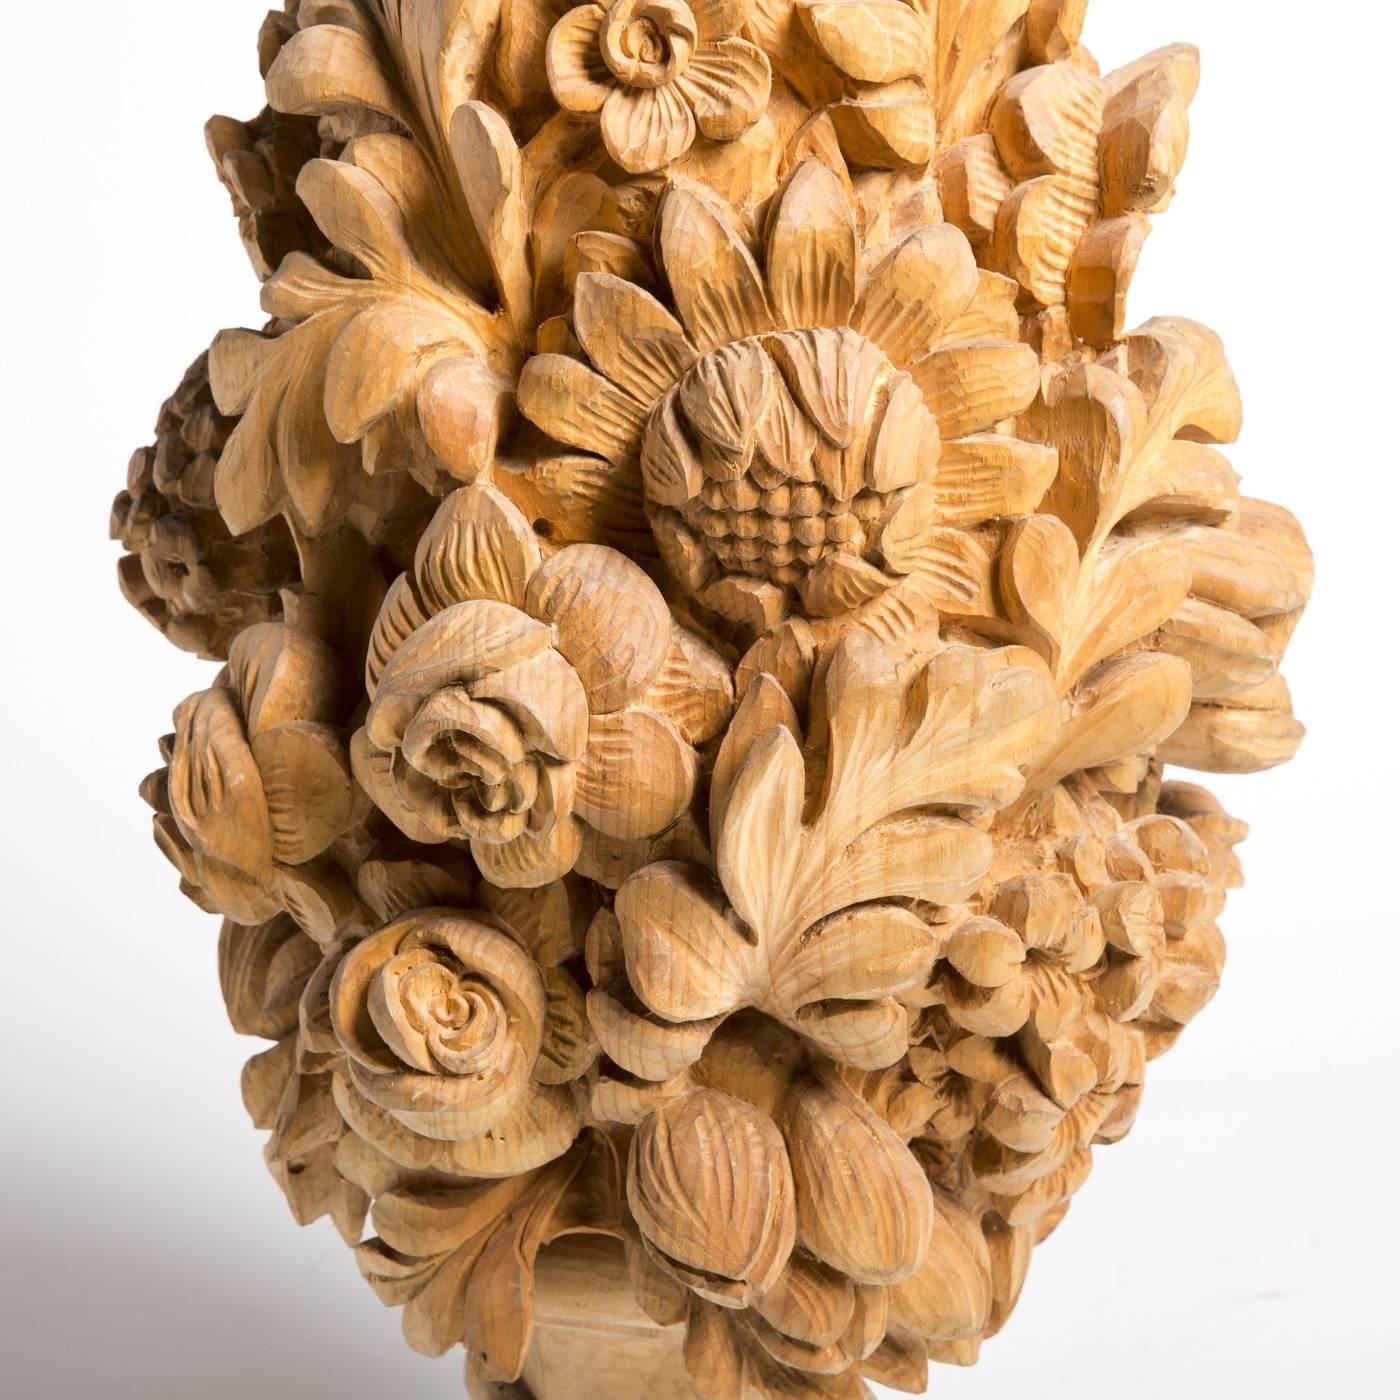 Decorative centerpiece by Bartolozzi e Maioli, masterfully hand-carved out of a block of Austrian pine with elegant flower and foliage adornment. The piece rests on a hexagonal pedestal with a natural wax finish.